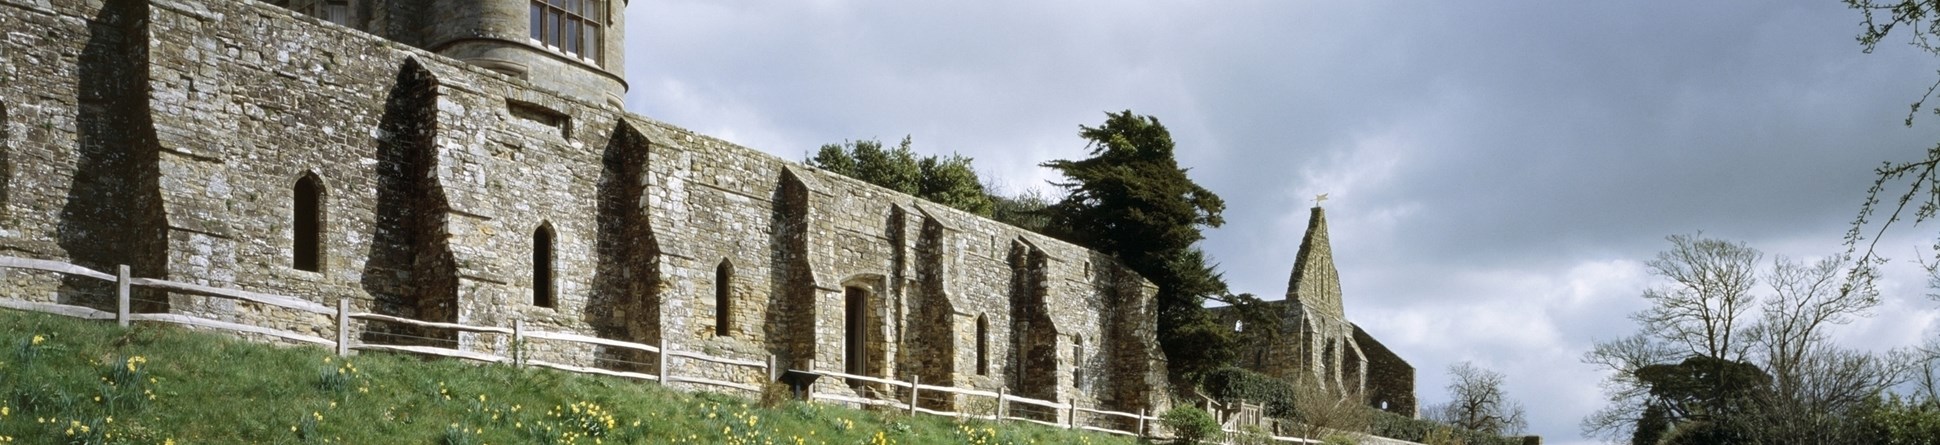 Battle Abbey, at the site of the Battle of Hastings in East Sussex